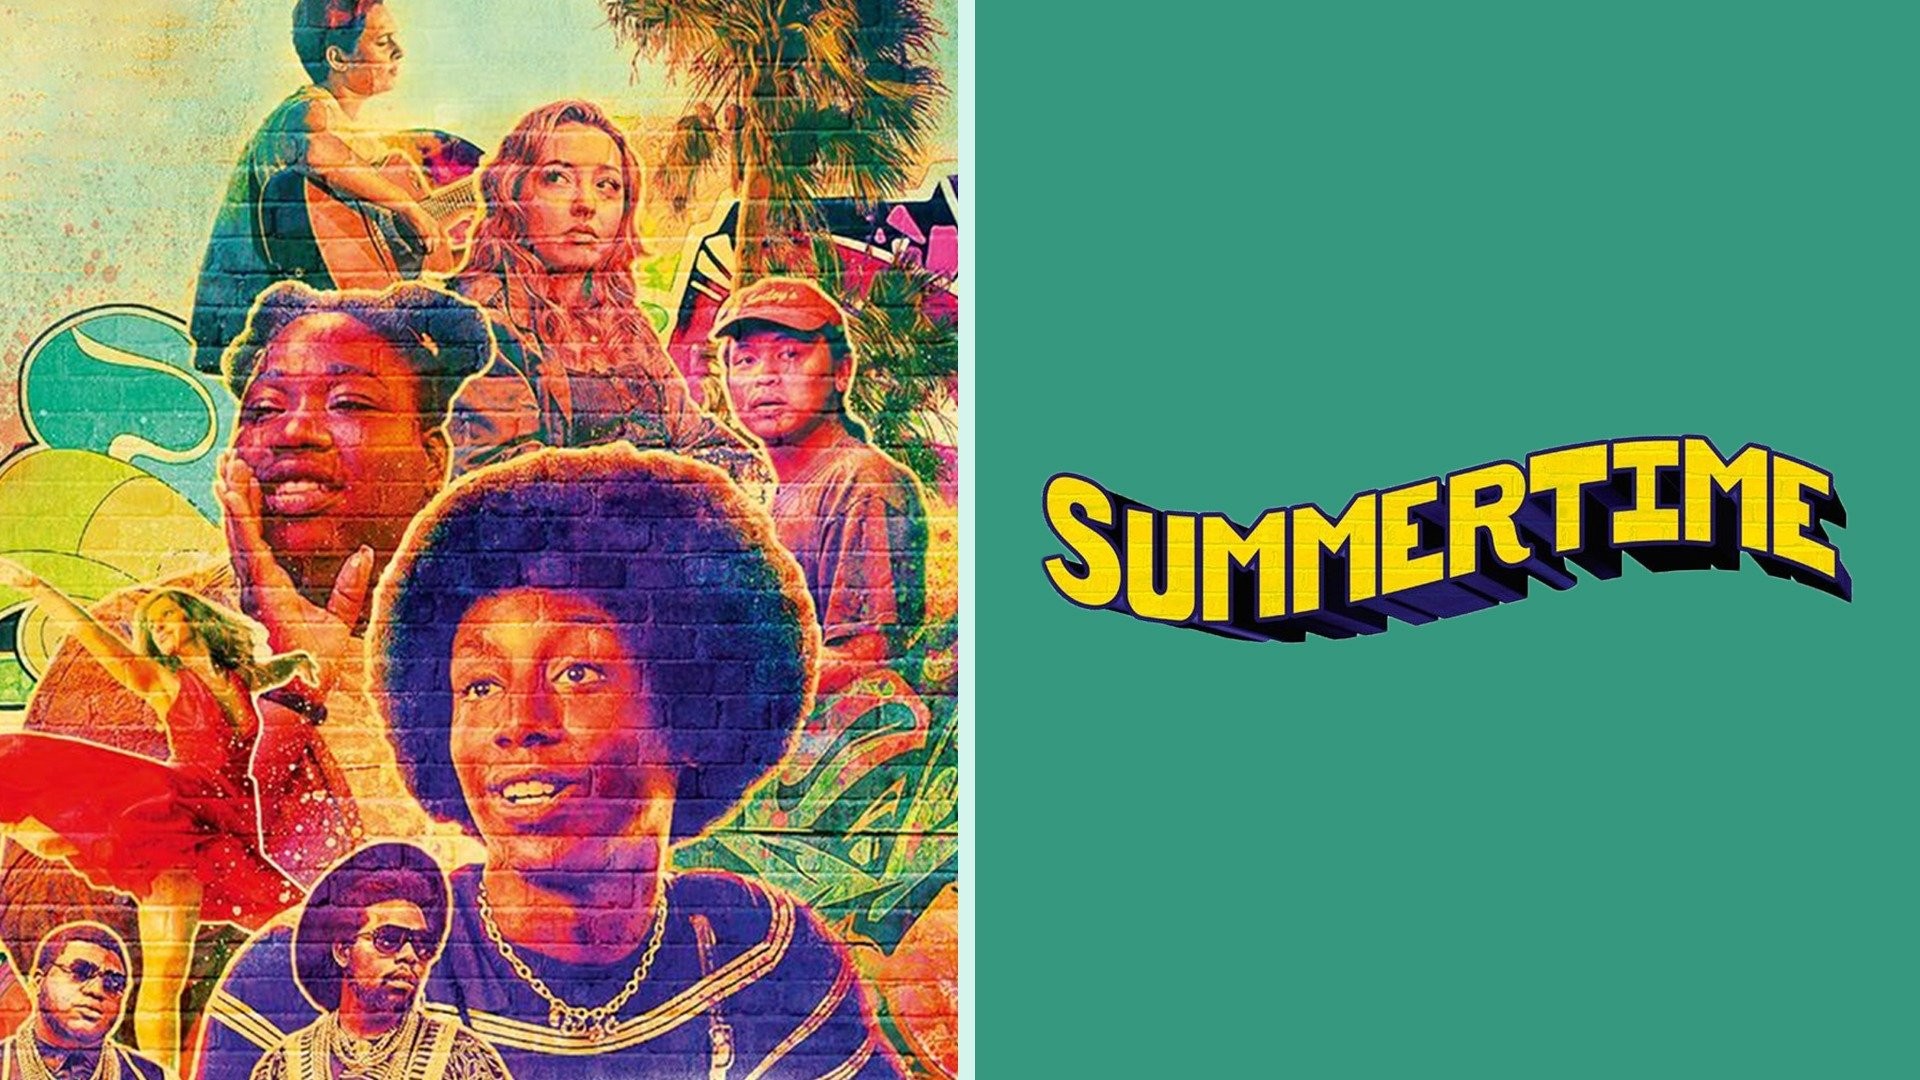 Summer Time Rendering - Rotten Tomatoes